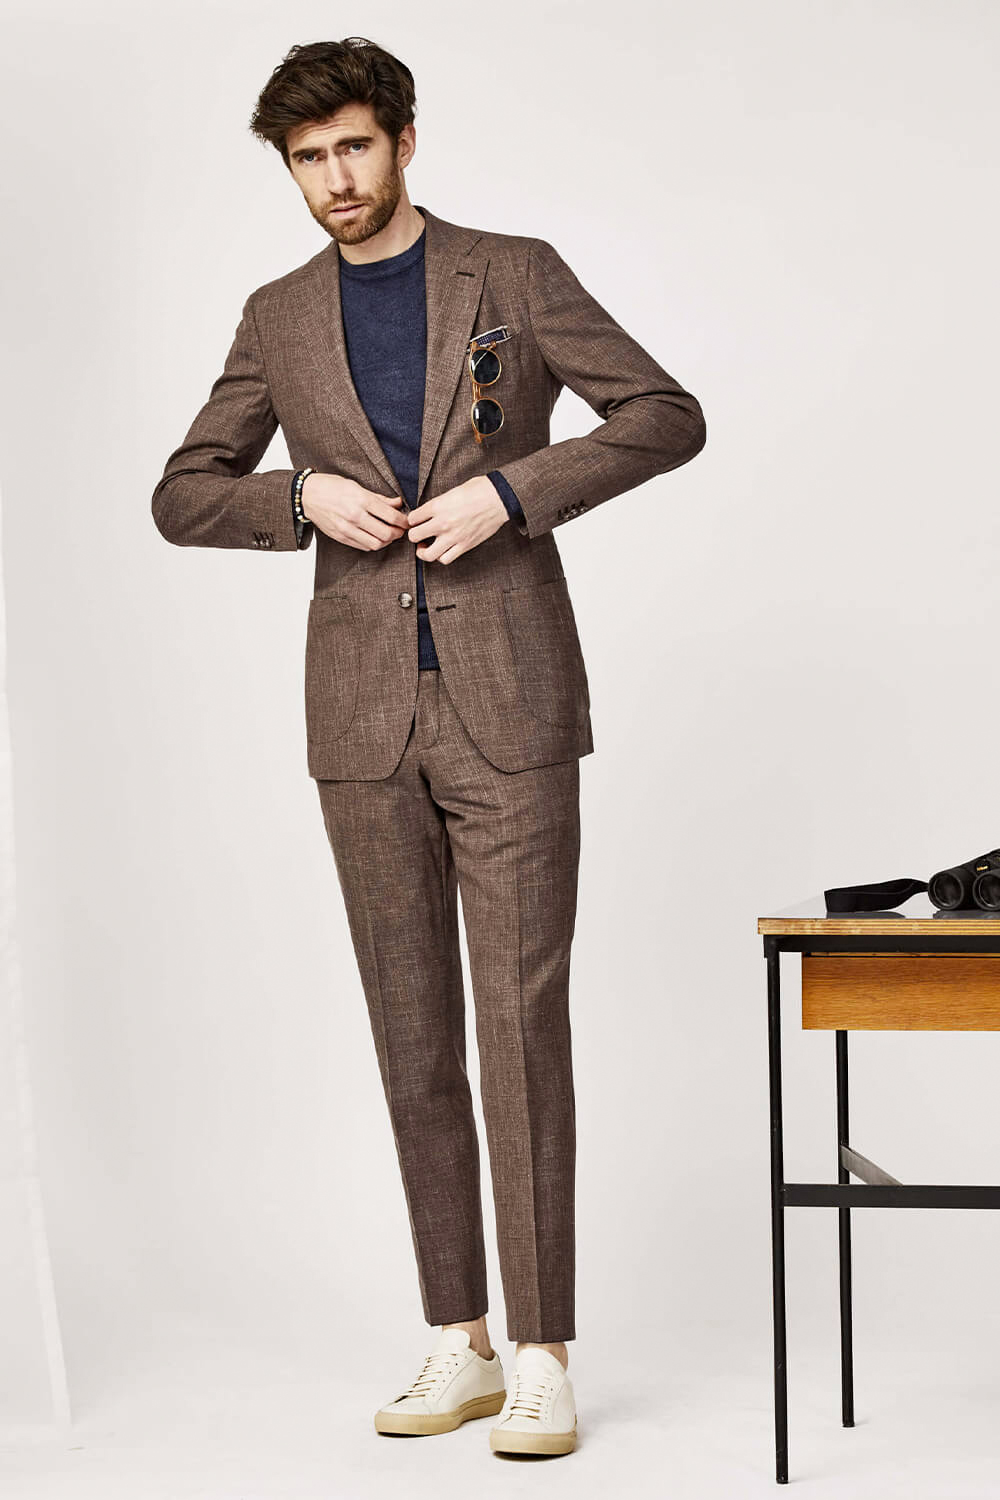 Stylish Ways to Wear a Suit with Sneakers - Suits Expert